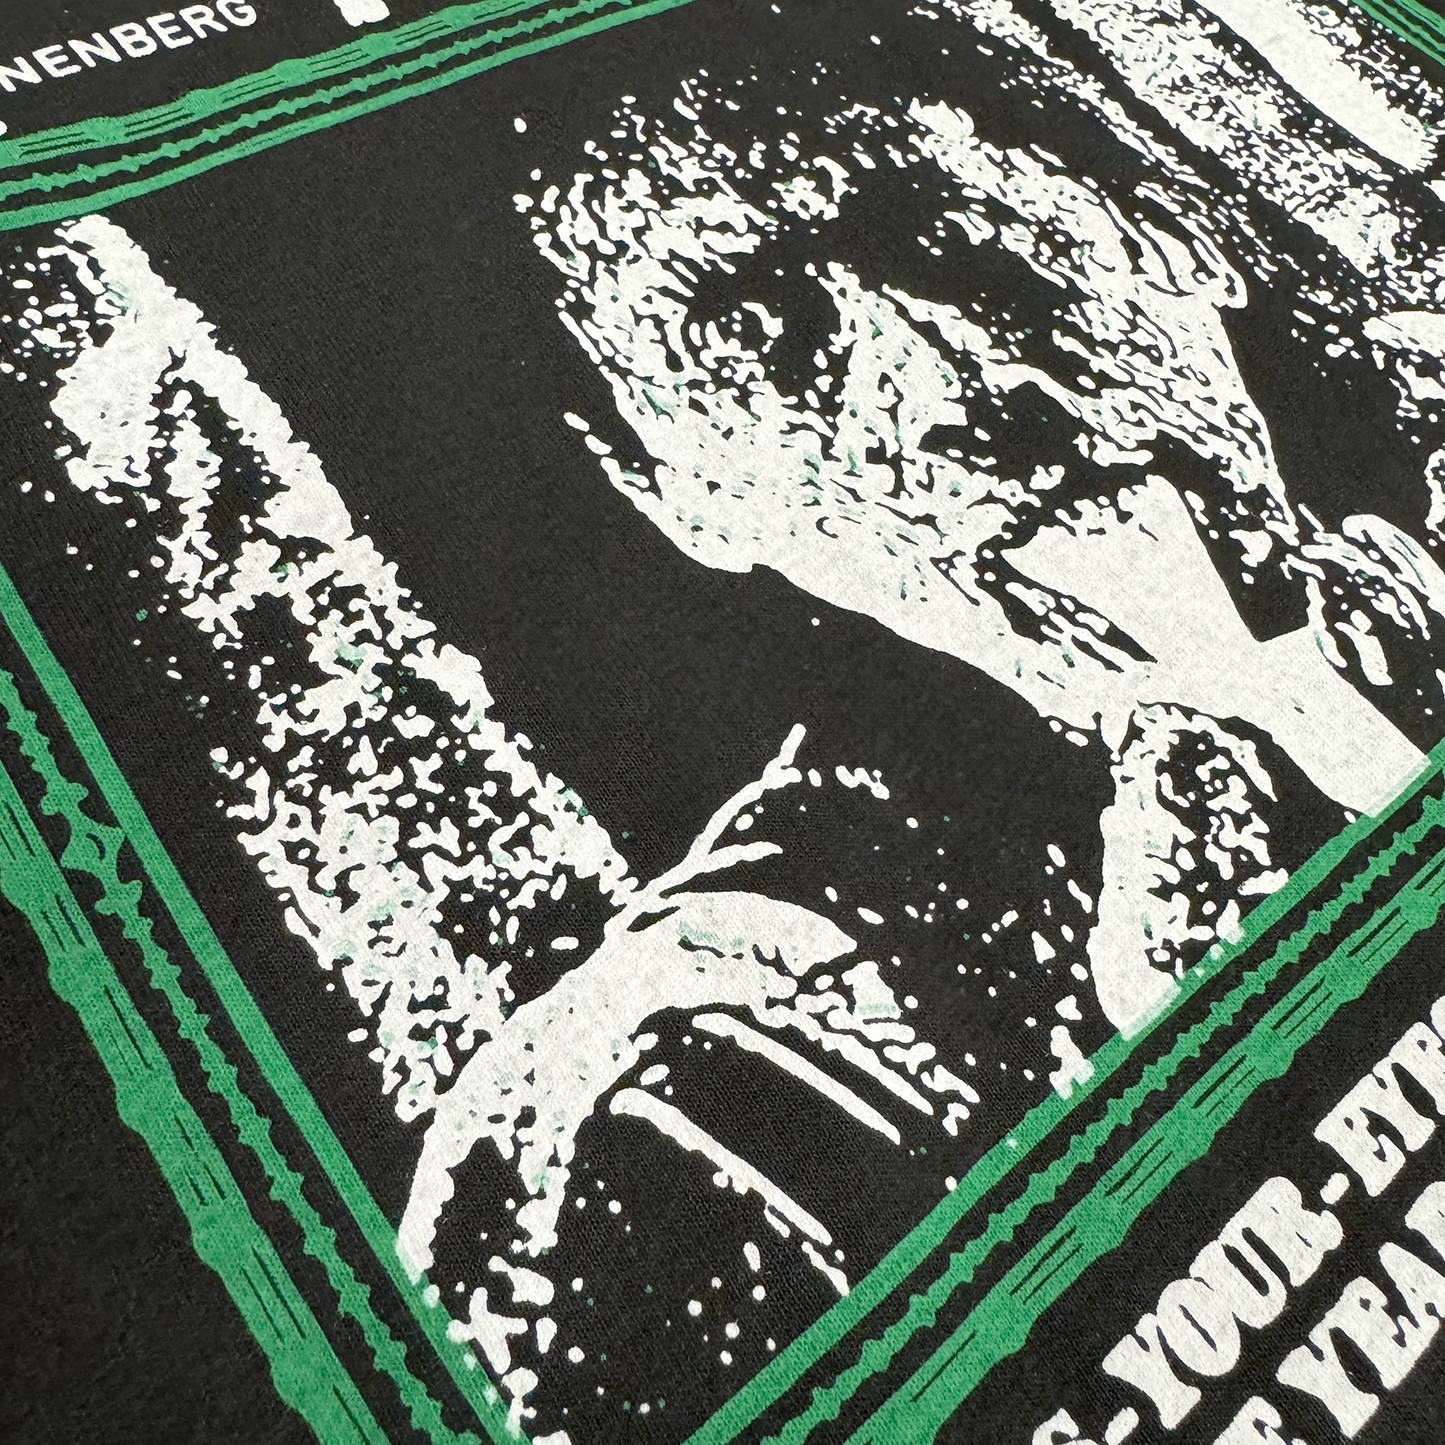 Detailed and zoomed in photo of the front of the shirt, which features the main character vomiting fluid with a green border.